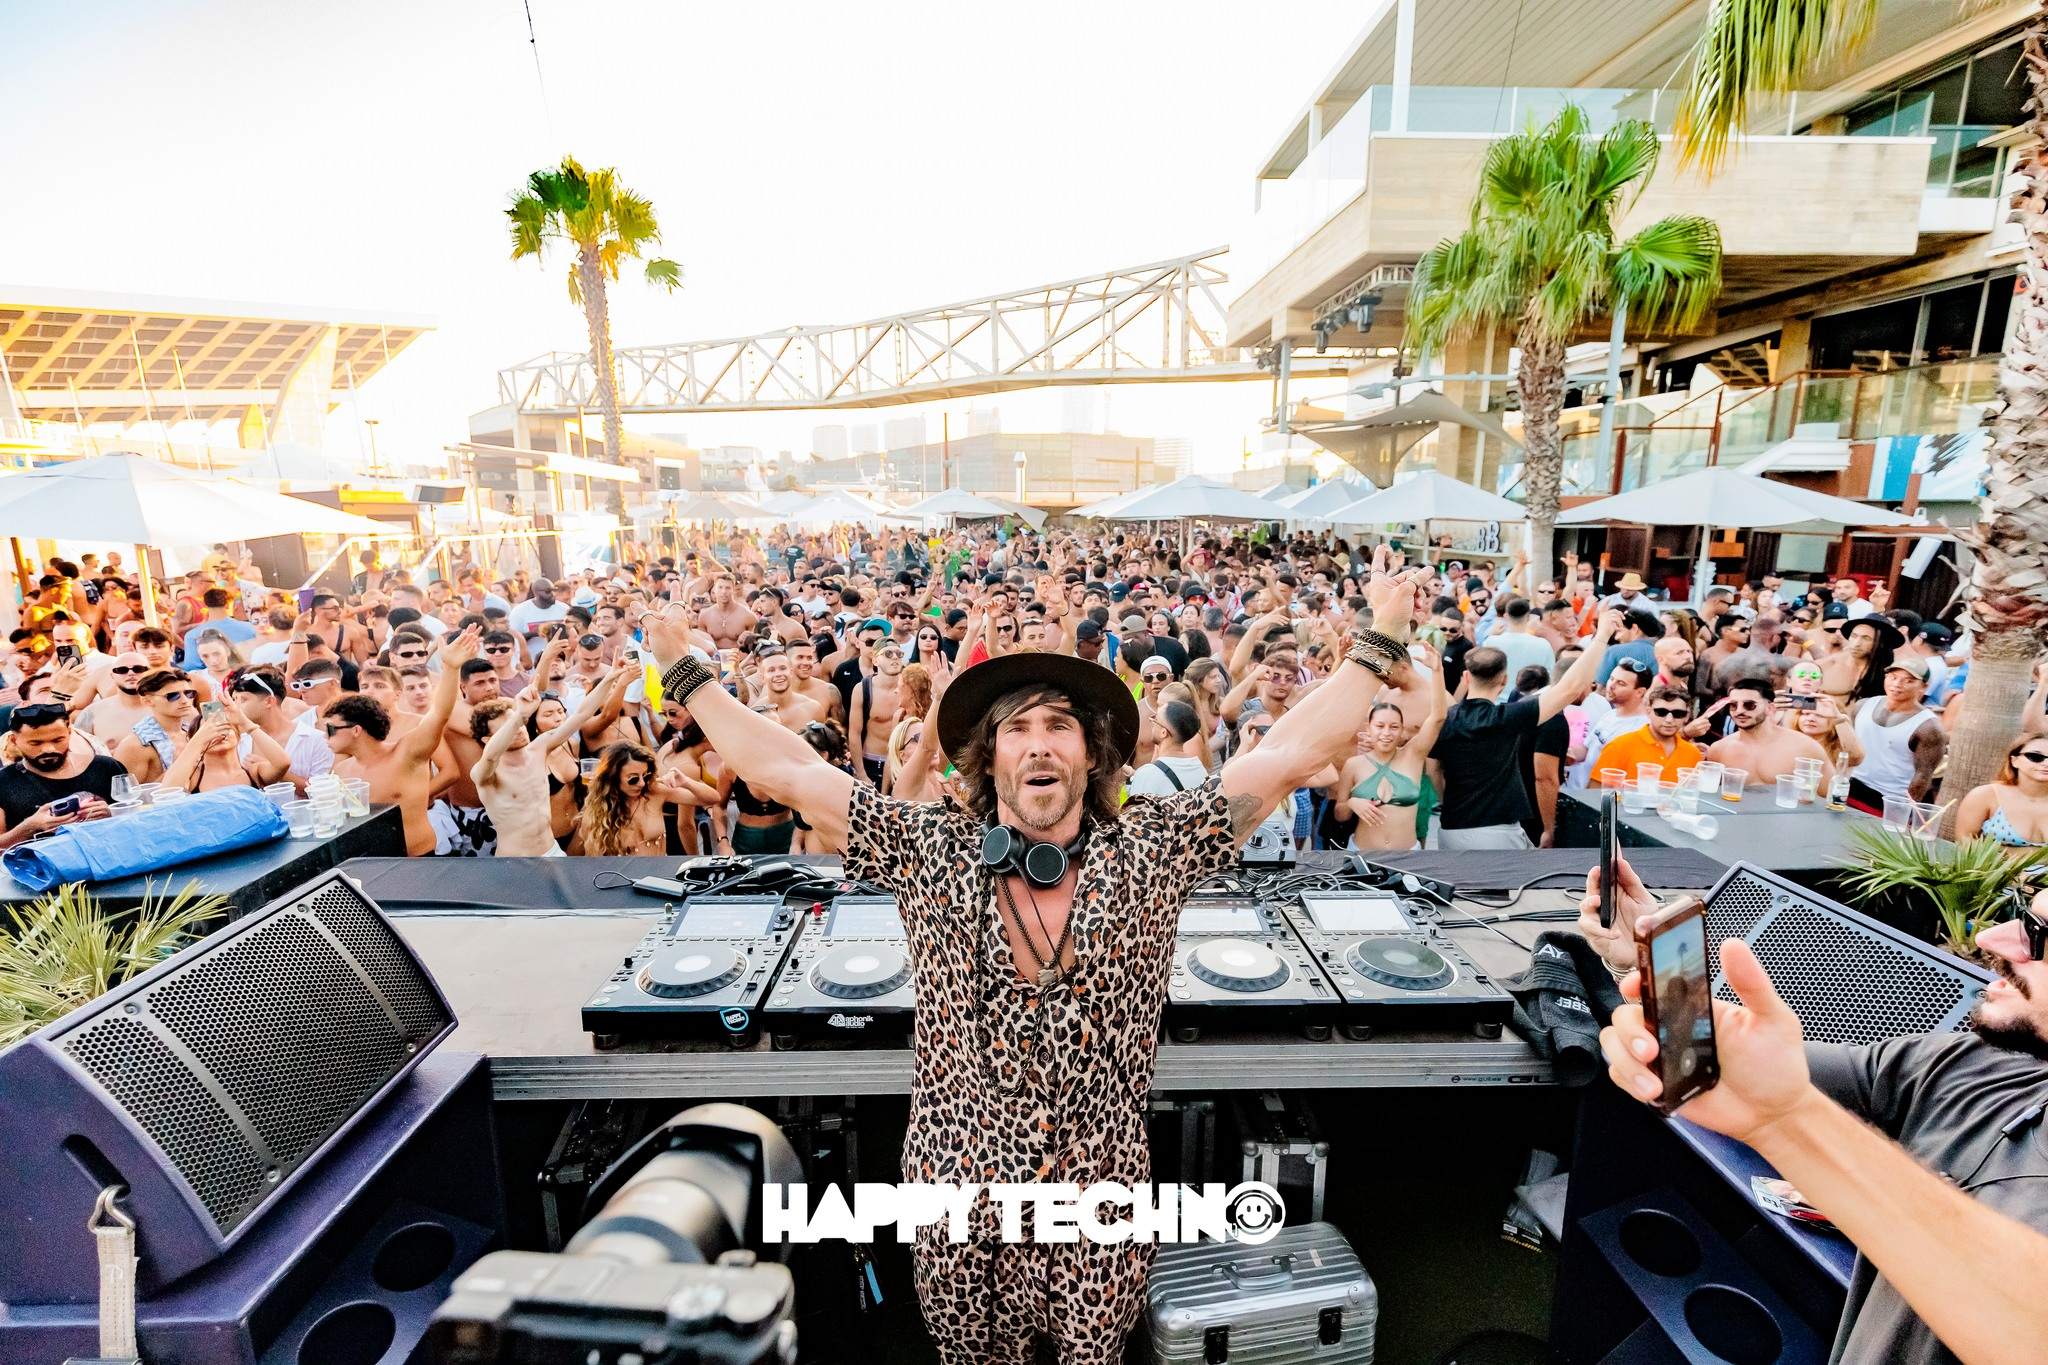 HappyTechno Pool Party Open Air with Mark Knight, Mark Broom, Lexlay  - フライヤー裏